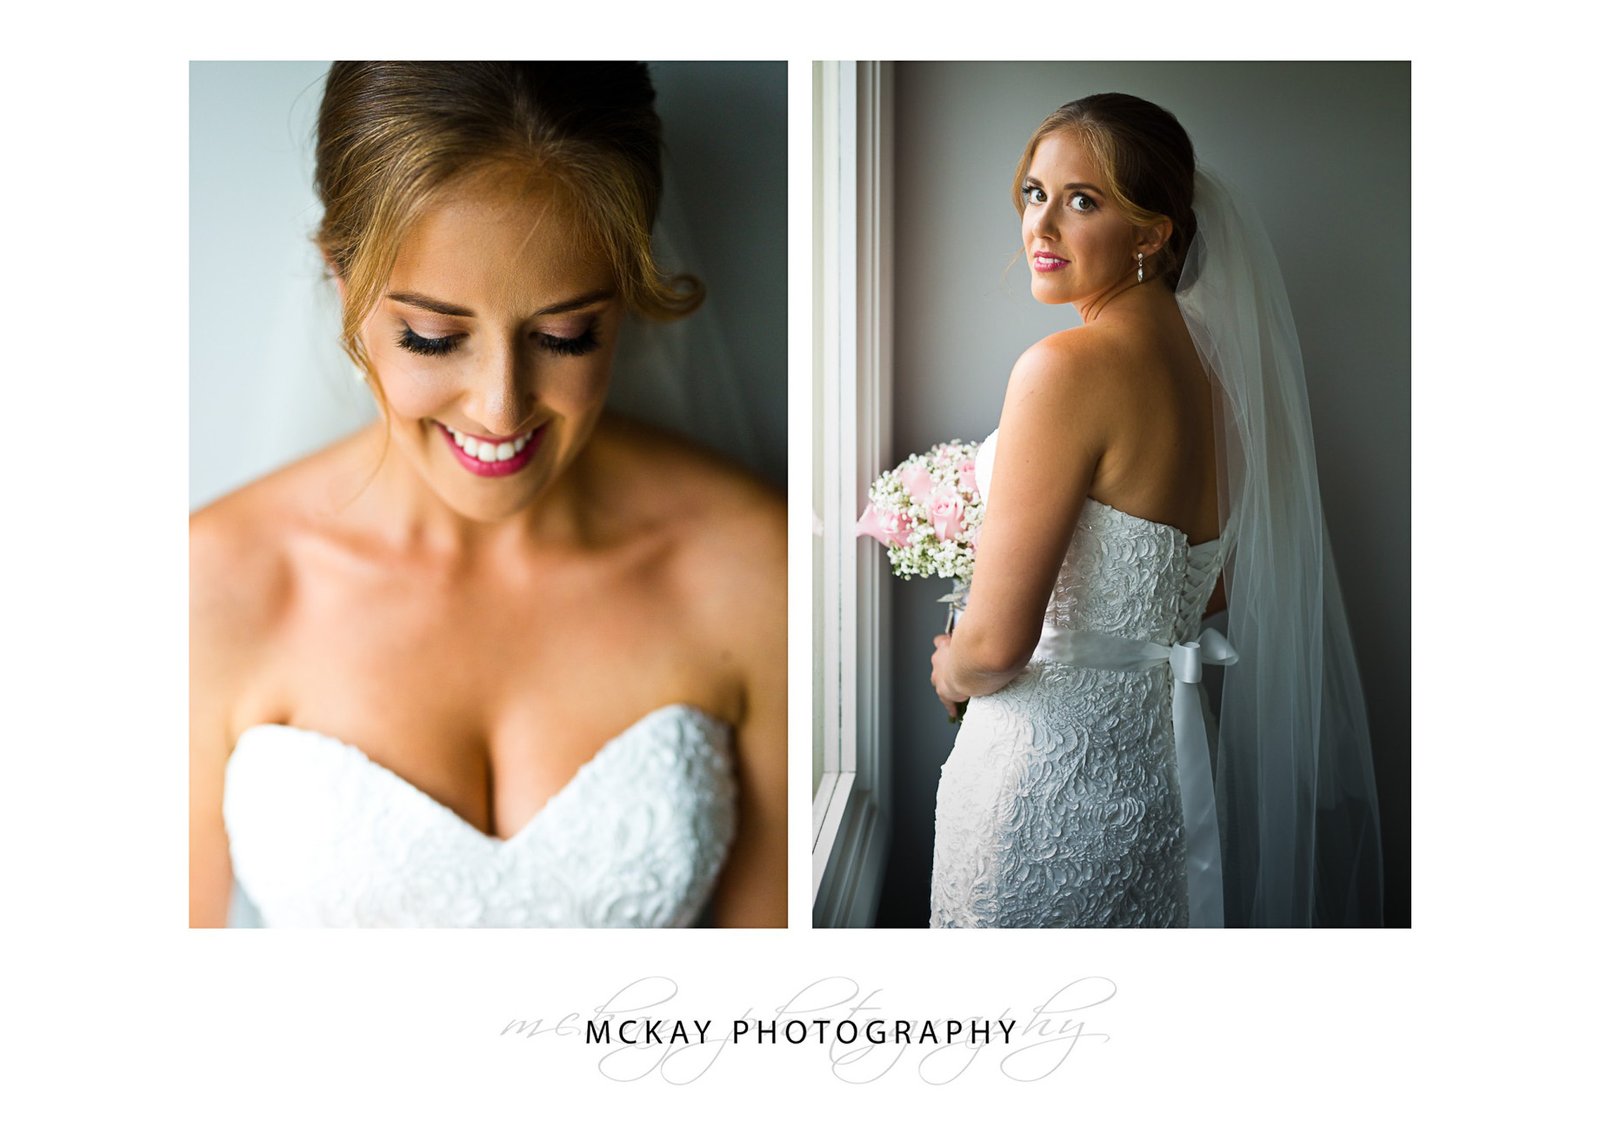 Bride dress and portrait photo at Peppers Craigieburn wedding in Bowral